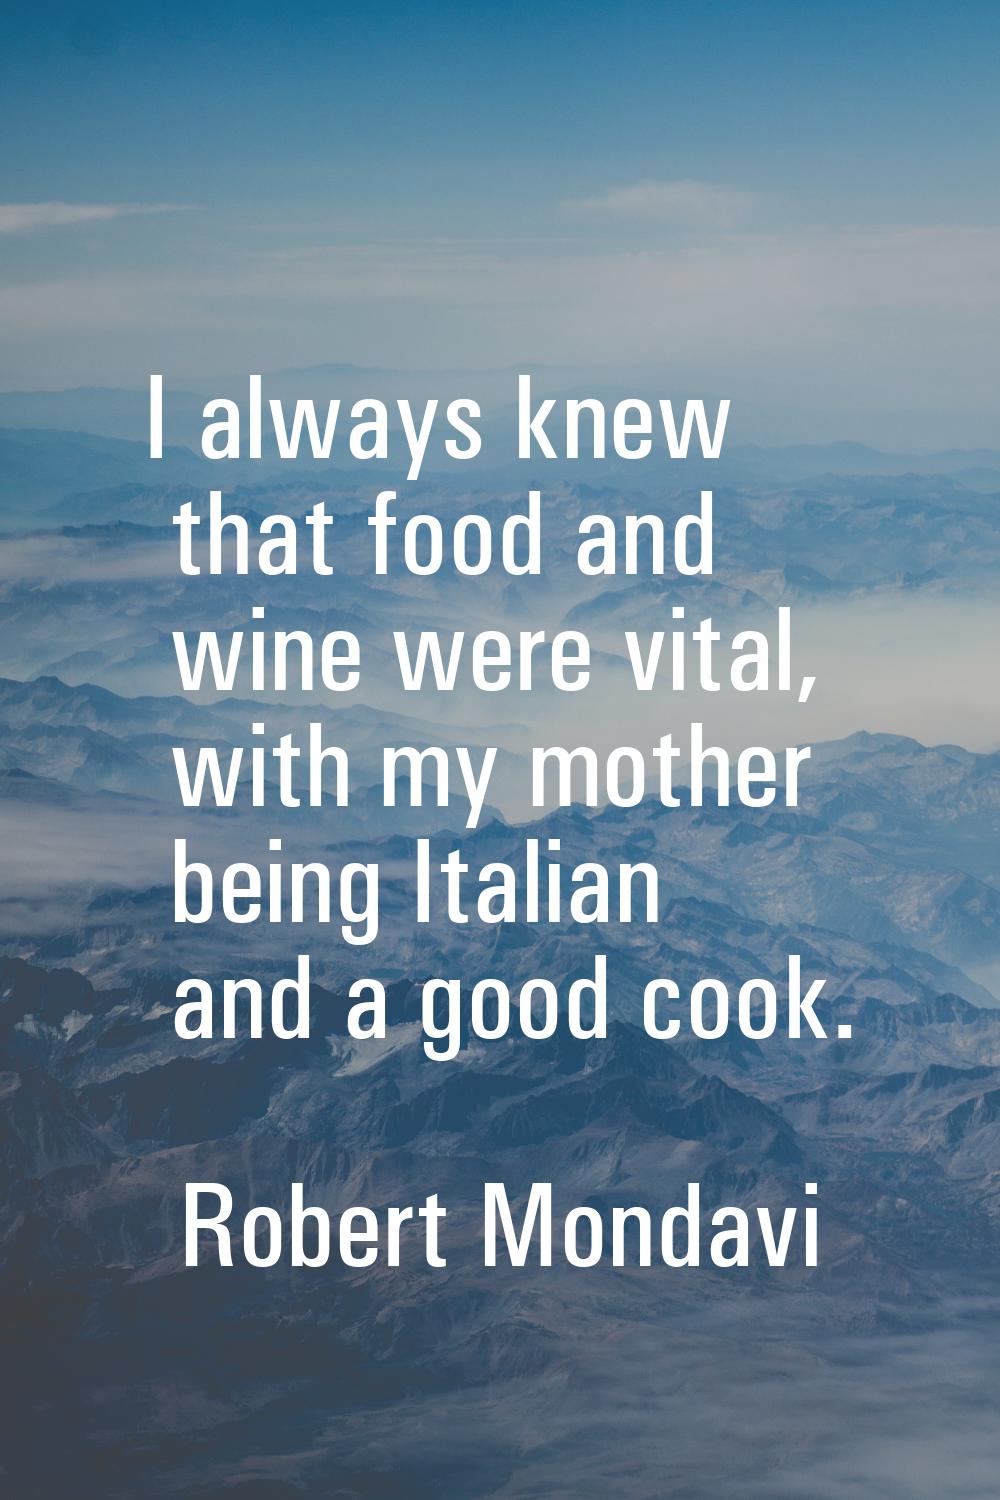 I always knew that food and wine were vital, with my mother being Italian and a good cook.